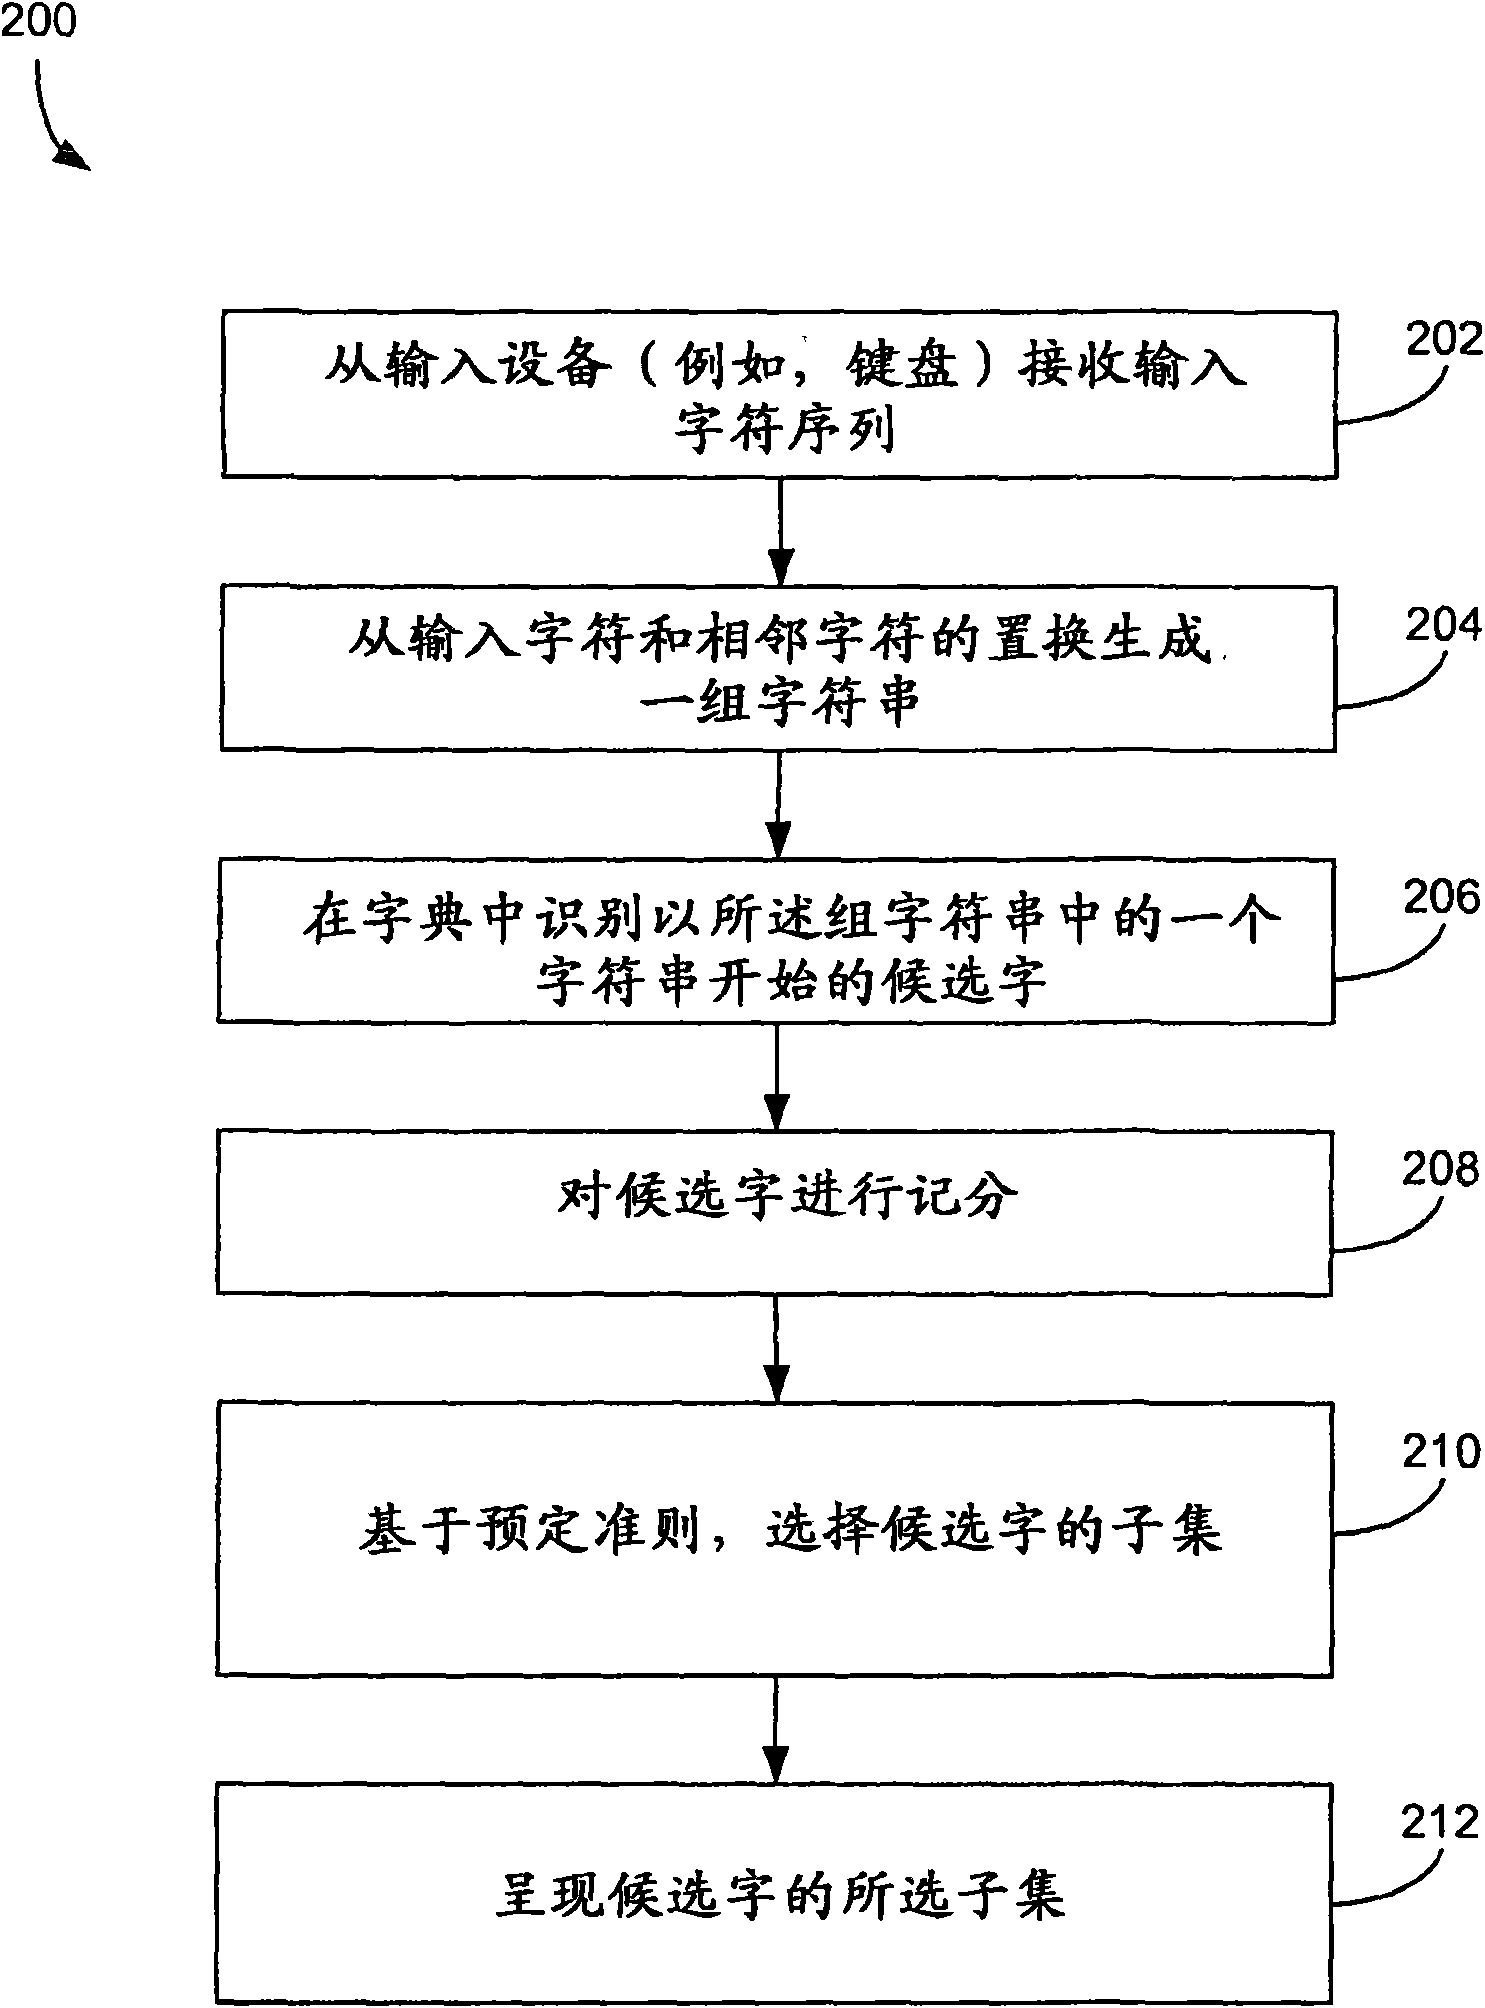 Method and system for providing word recommendations for text input